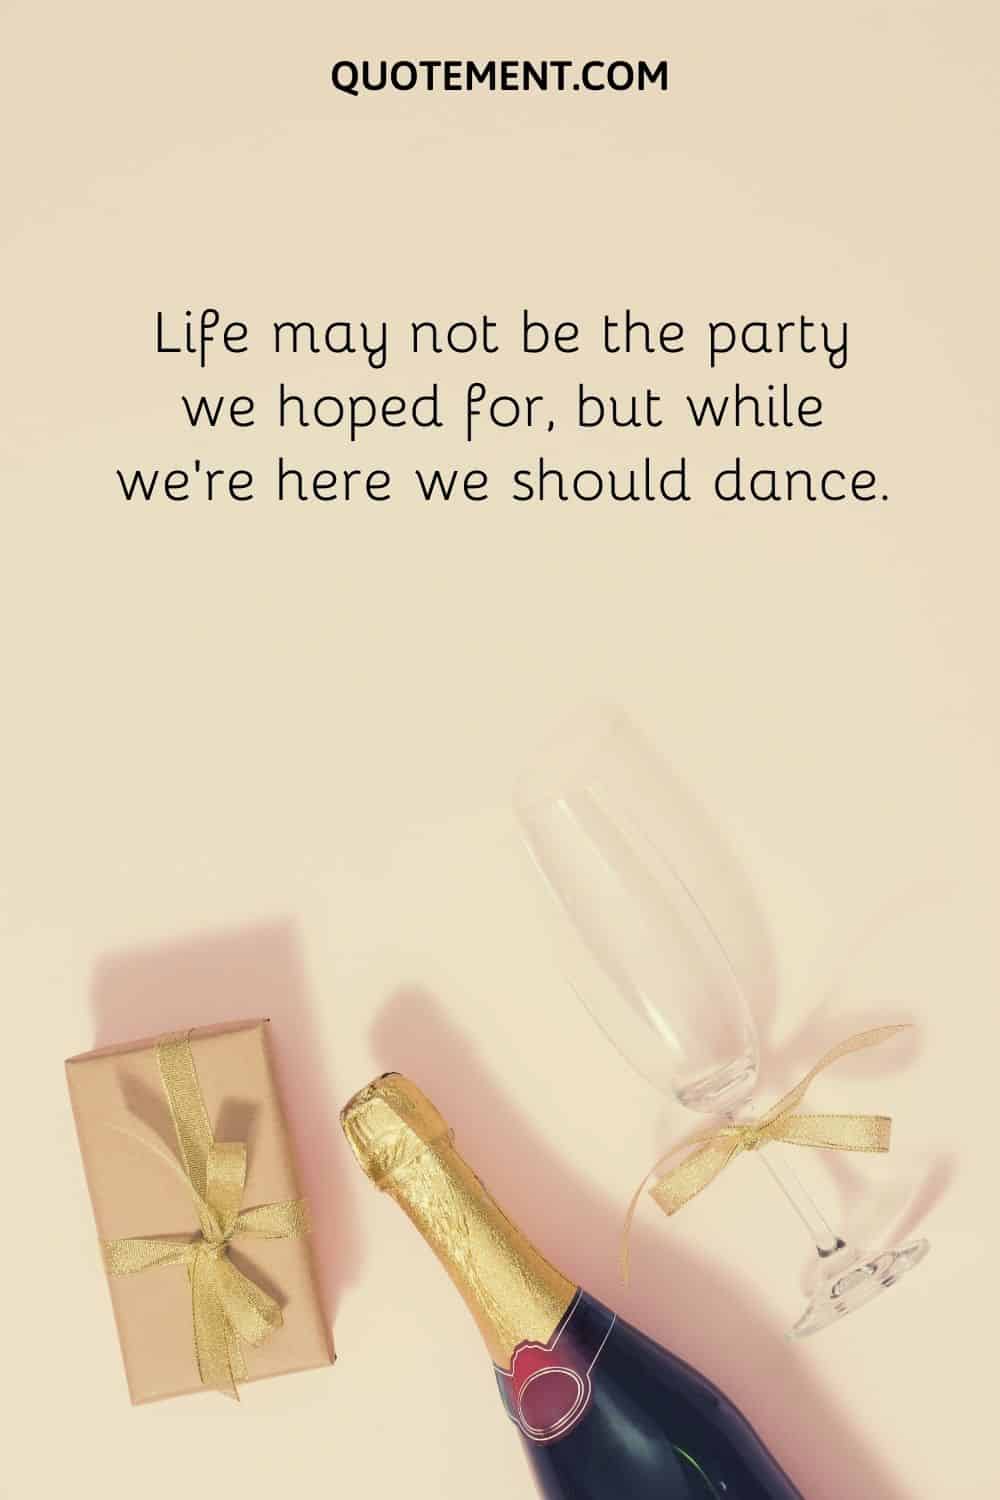 Life may not be the party we hoped for, but while we're here we should dance